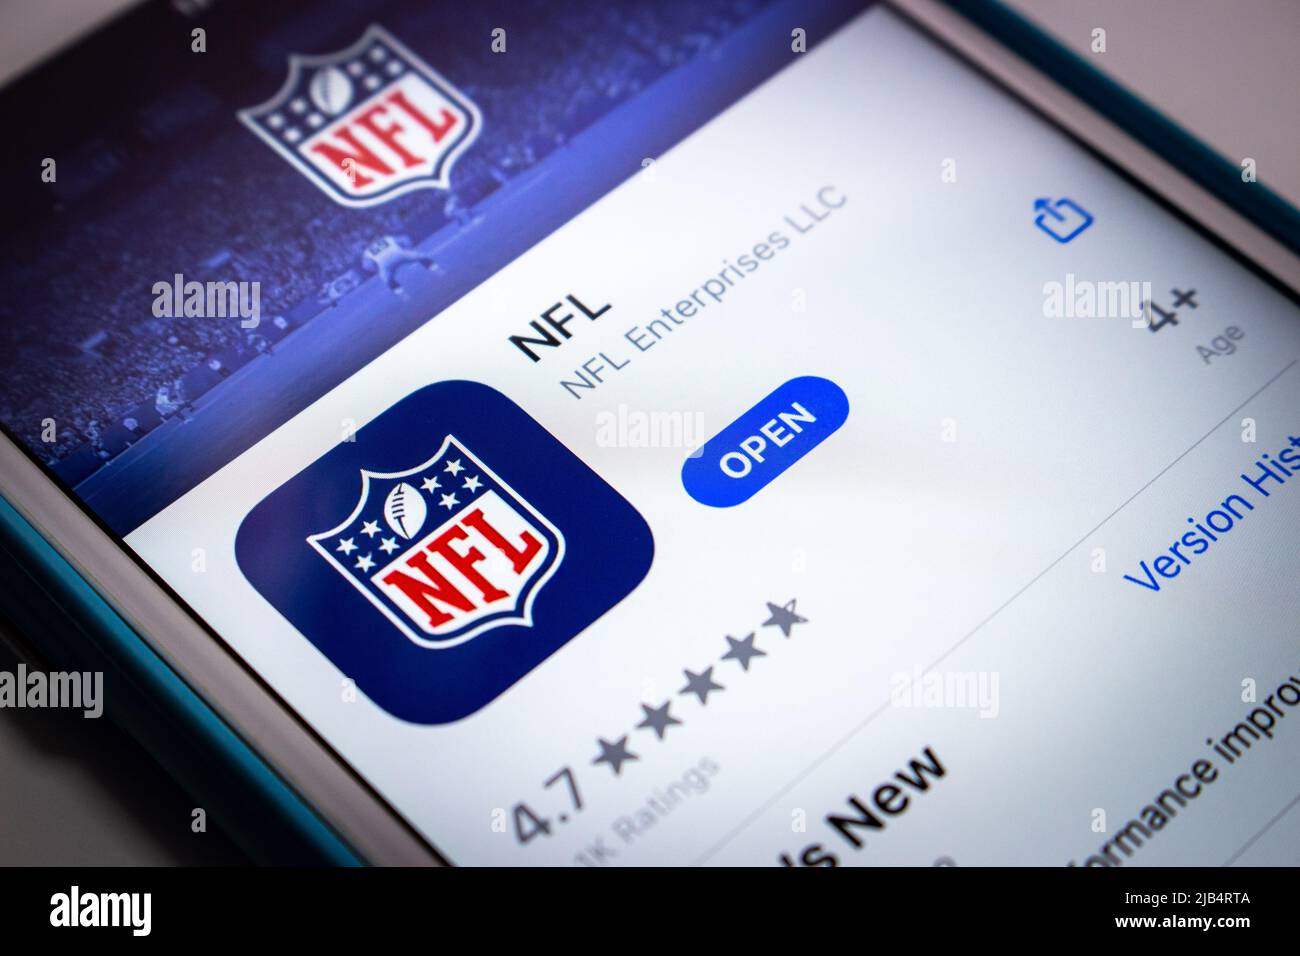 Kumamoto, Japan - Aug 17 2020 : NFL (The National Football League), a pro American football league consisting of 32 teams, on App Store on iPhone. Stock Photo